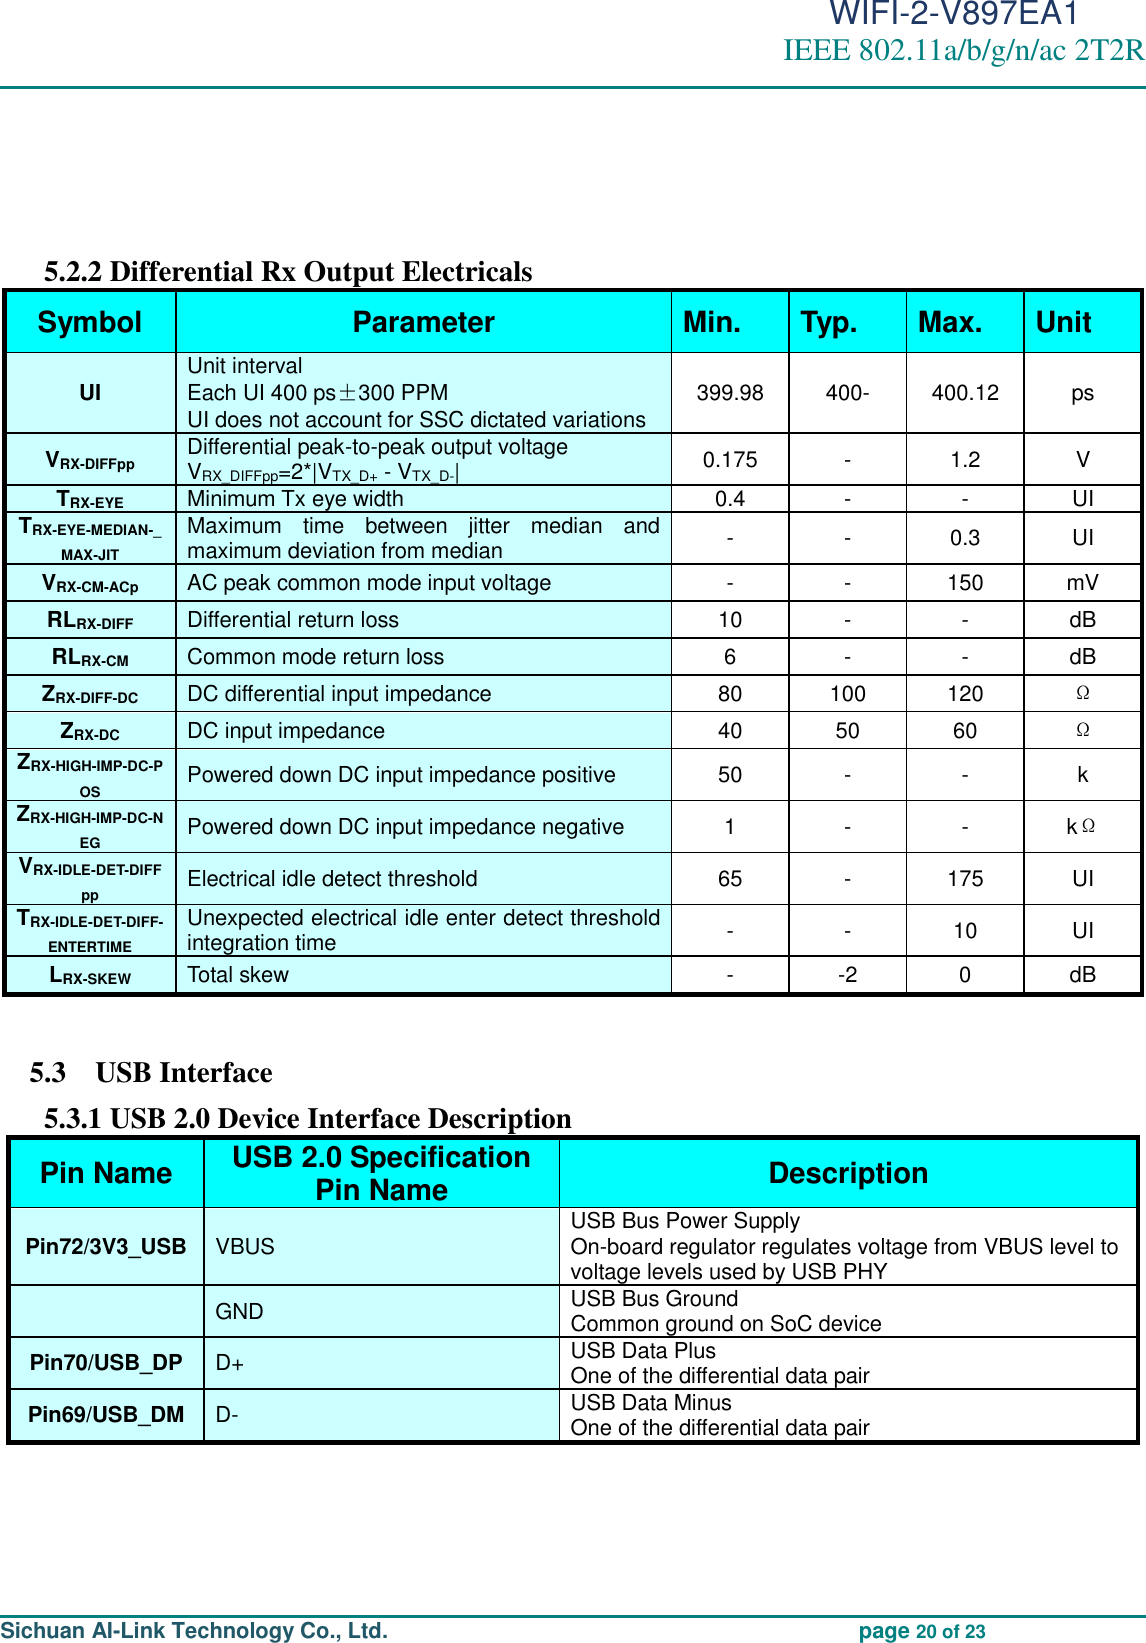                                                                                          WIFI-2-V897EA1 IEEE 802.11a/b/g/n/ac 2T2R                                                                                                                                                                                                                                                                                                                                                                                                                     Sichuan AI-Link Technology Co., Ltd.                                             page 20 of 23     5.2.2 Differential Rx Output Electricals Symbol Parameter Min. Typ. Max. Unit UI Unit interval   Each UI 400 ps±300 PPM UI does not account for SSC dictated variations 399.98 400- 400.12 ps VRX-DIFFpp   Differential peak-to-peak output voltage VRX_DIFFpp=2*|VTX_D+ - VTX_D-| 0.175 - 1.2 V TRX-EYE Minimum Tx eye width 0.4 - - UI TRX-EYE-MEDIAN-_MAX-JIT Maximum  time  between  jitter  median  and maximum deviation from median - - 0.3 UI VRX-CM-ACp AC peak common mode input voltage - - 150 mV RLRX-DIFF Differential return loss 10 - - dB RLRX-CM Common mode return loss 6 - - dB ZRX-DIFF-DC DC differential input impedance 80 100 120 Ω ZRX-DC DC input impedance 40 50 60 Ω ZRX-HIGH-IMP-DC-POS Powered down DC input impedance positive 50 - - k ZRX-HIGH-IMP-DC-NEG Powered down DC input impedance negative 1 - - kΩ VRX-IDLE-DET-DIFFpp Electrical idle detect threshold 65 - 175 UI TRX-IDLE-DET-DIFF-ENTERTIME Unexpected electrical idle enter detect threshold integration time - - 10 UI LRX-SKEW Total skew - -2 0 dB  5.3    USB Interface 5.3.1 USB 2.0 Device Interface Description Pin Name USB 2.0 Specification   Pin Name Description Pin72/3V3_USB VBUS USB Bus Power Supply On-board regulator regulates voltage from VBUS level to voltage levels used by USB PHY  GND USB Bus Ground Common ground on SoC device Pin70/USB_DP D+ USB Data Plus One of the differential data pair Pin69/USB_DM D- USB Data Minus One of the differential data pair    